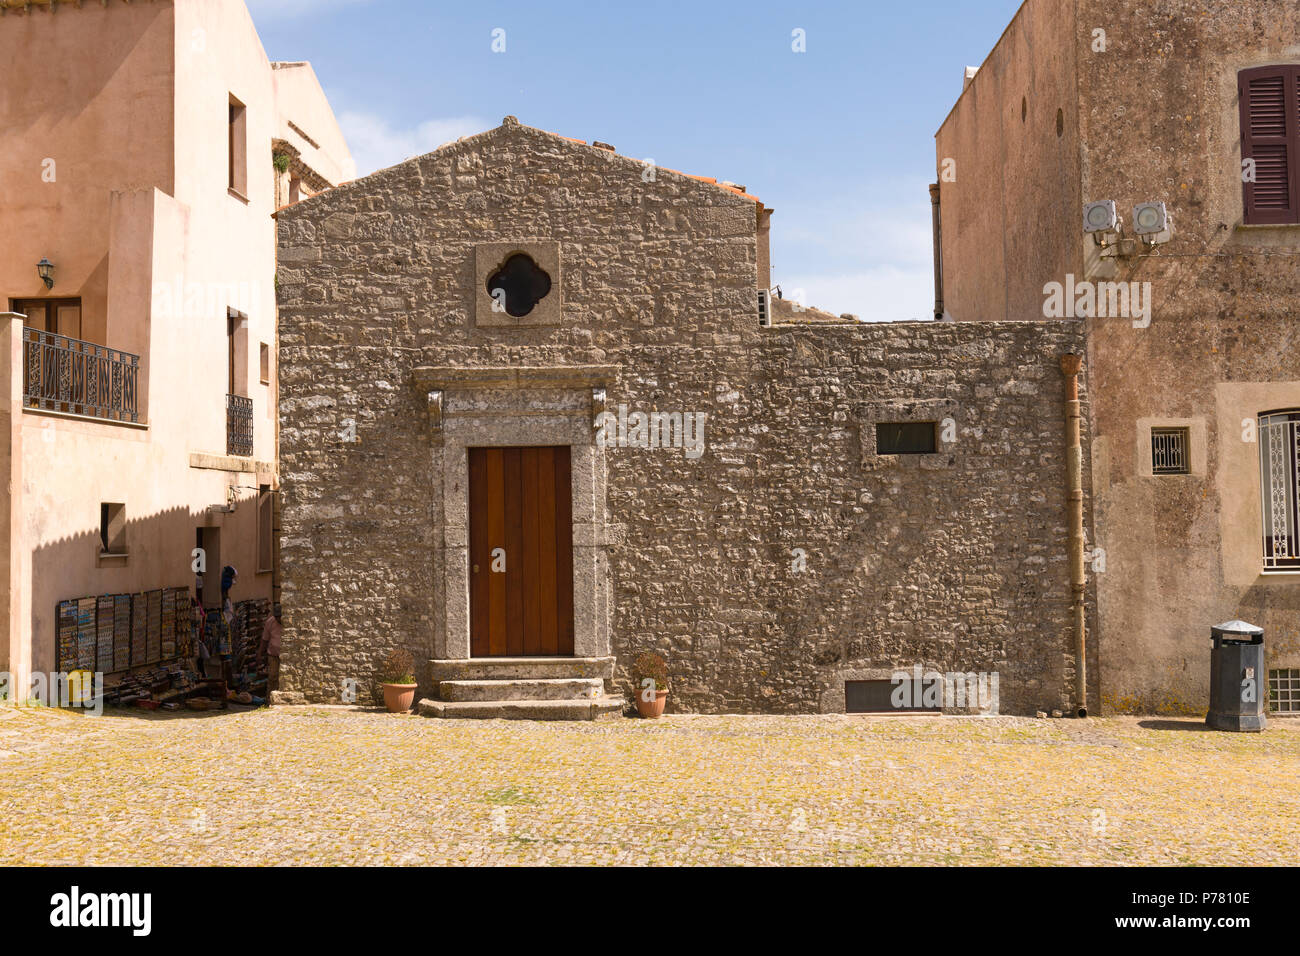 Italy Sicily medieval walled town Erice on Monte San Giuliana cult Venus Erycina street scene ancient stone building small windows wooden door steps Stock Photo